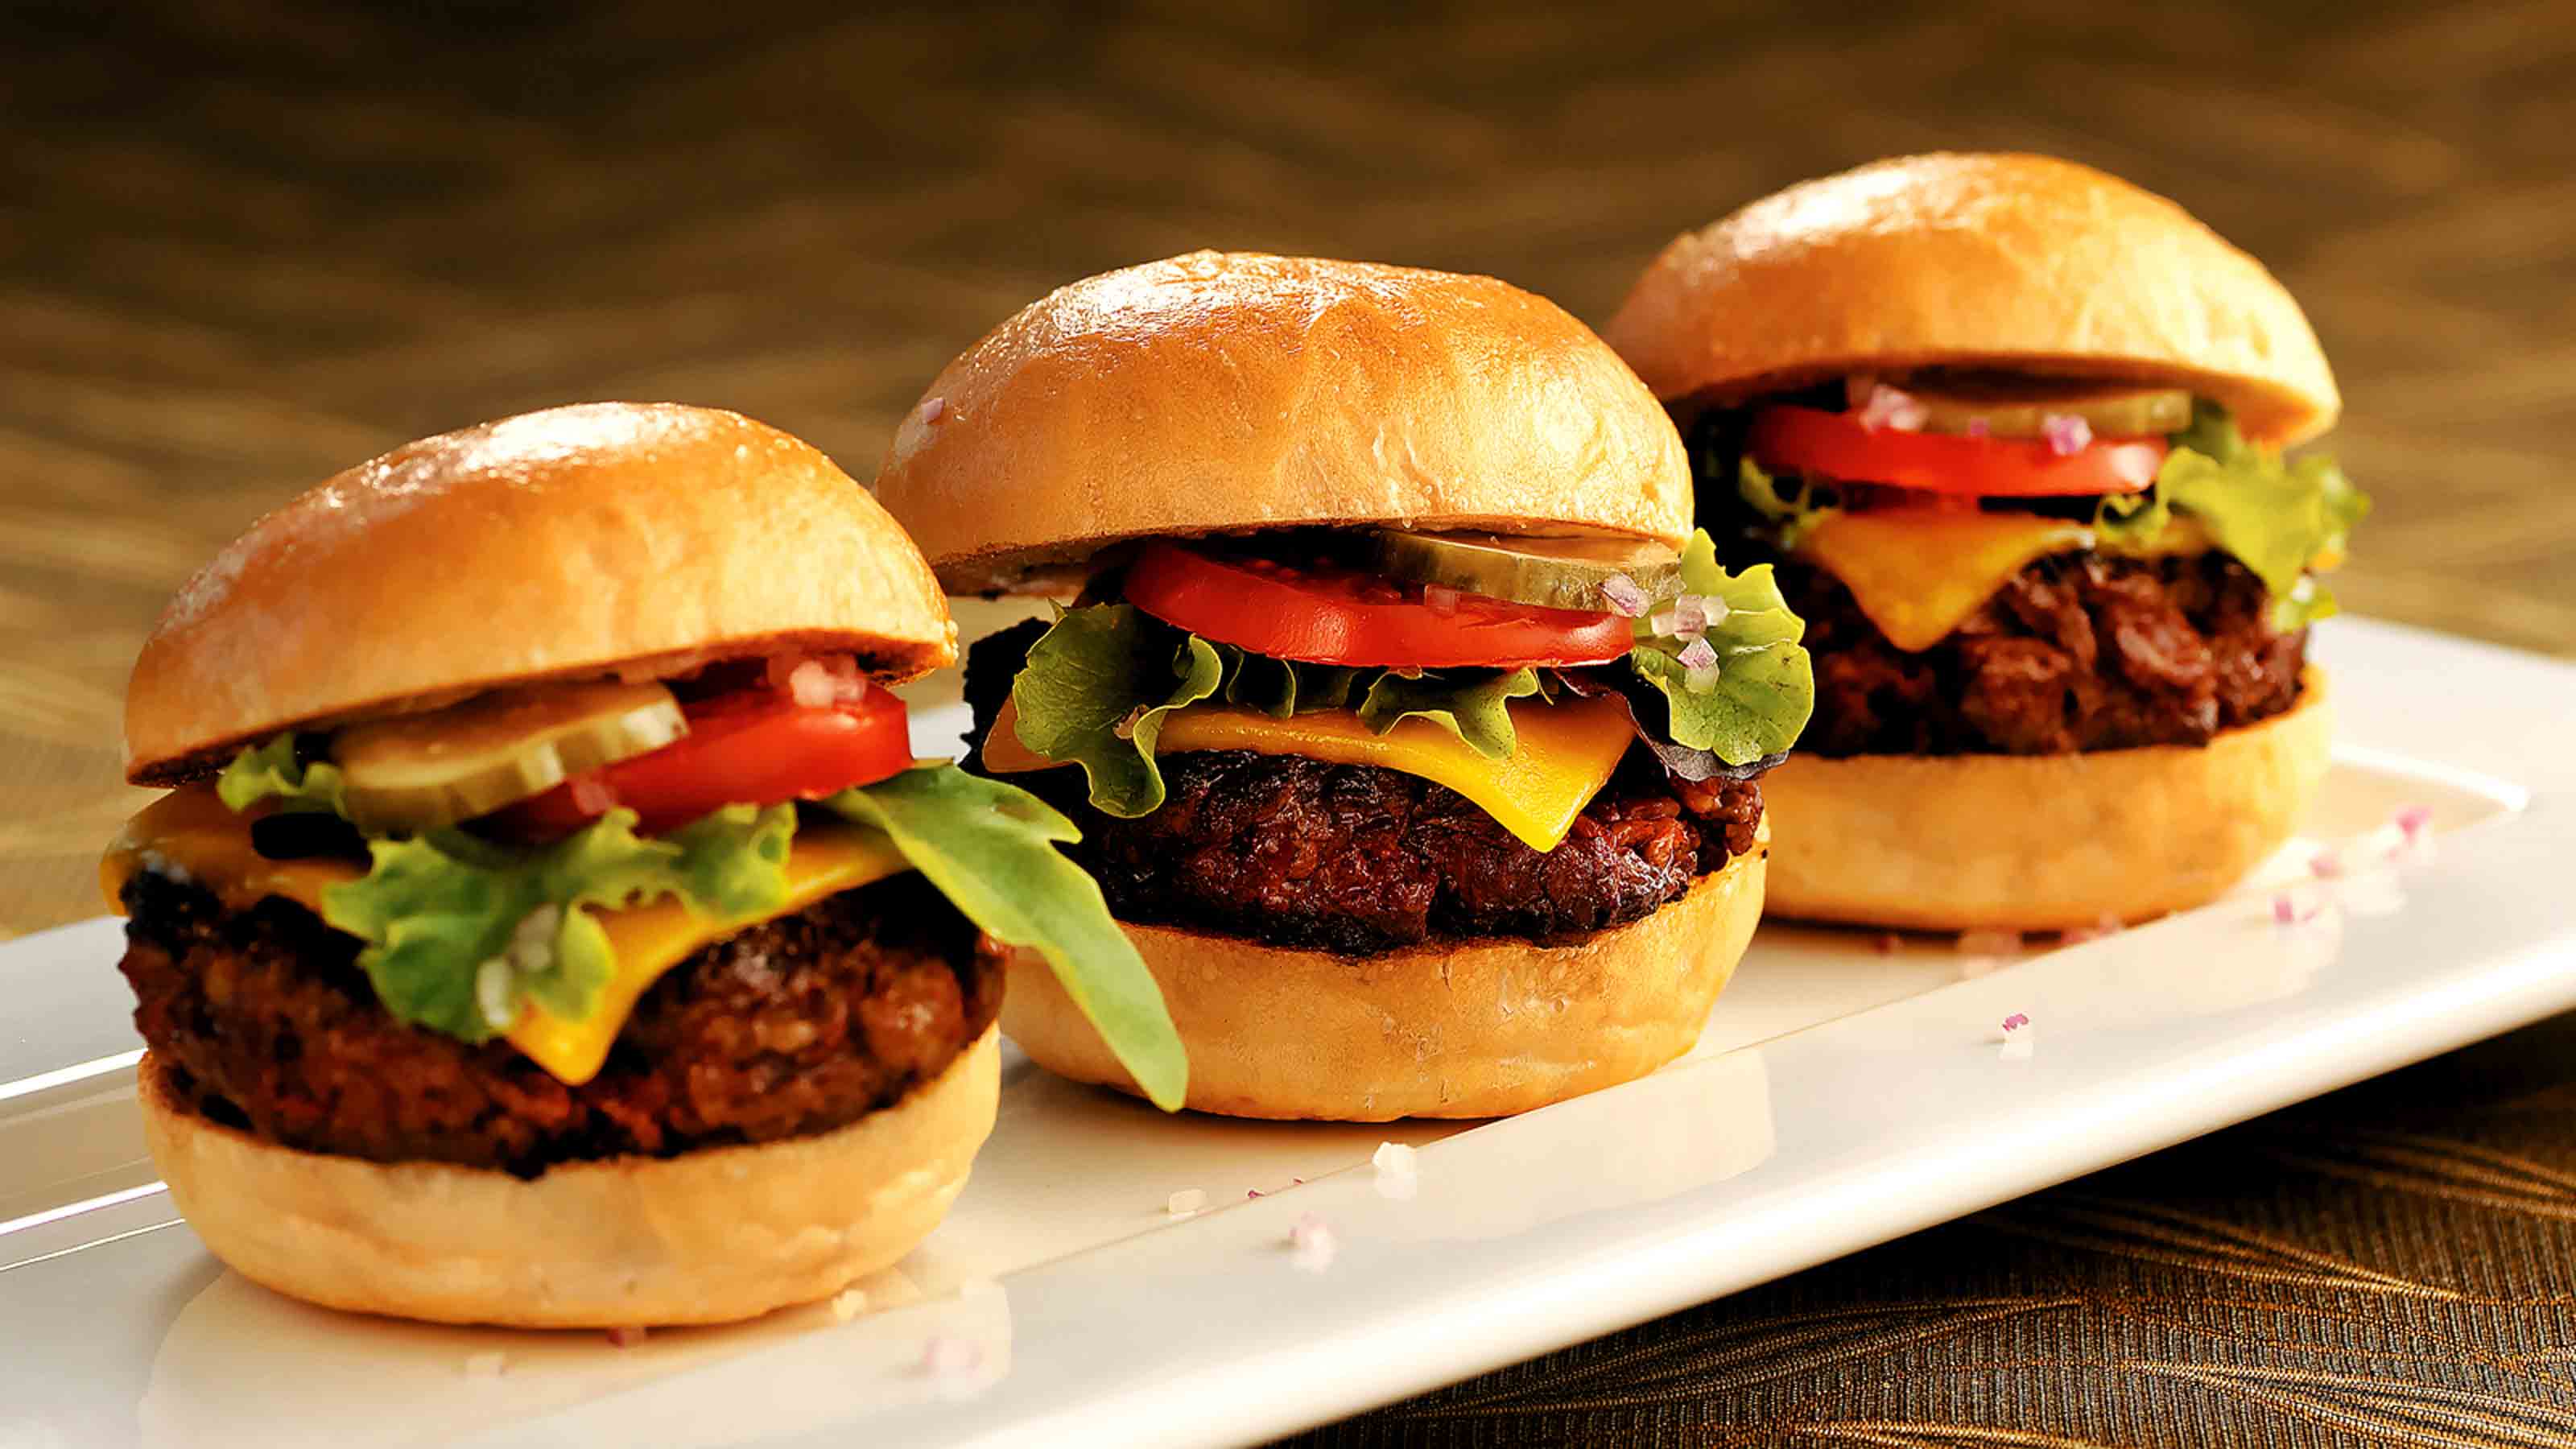 Mini Cheese Burgers With Truffle Oil | Plate